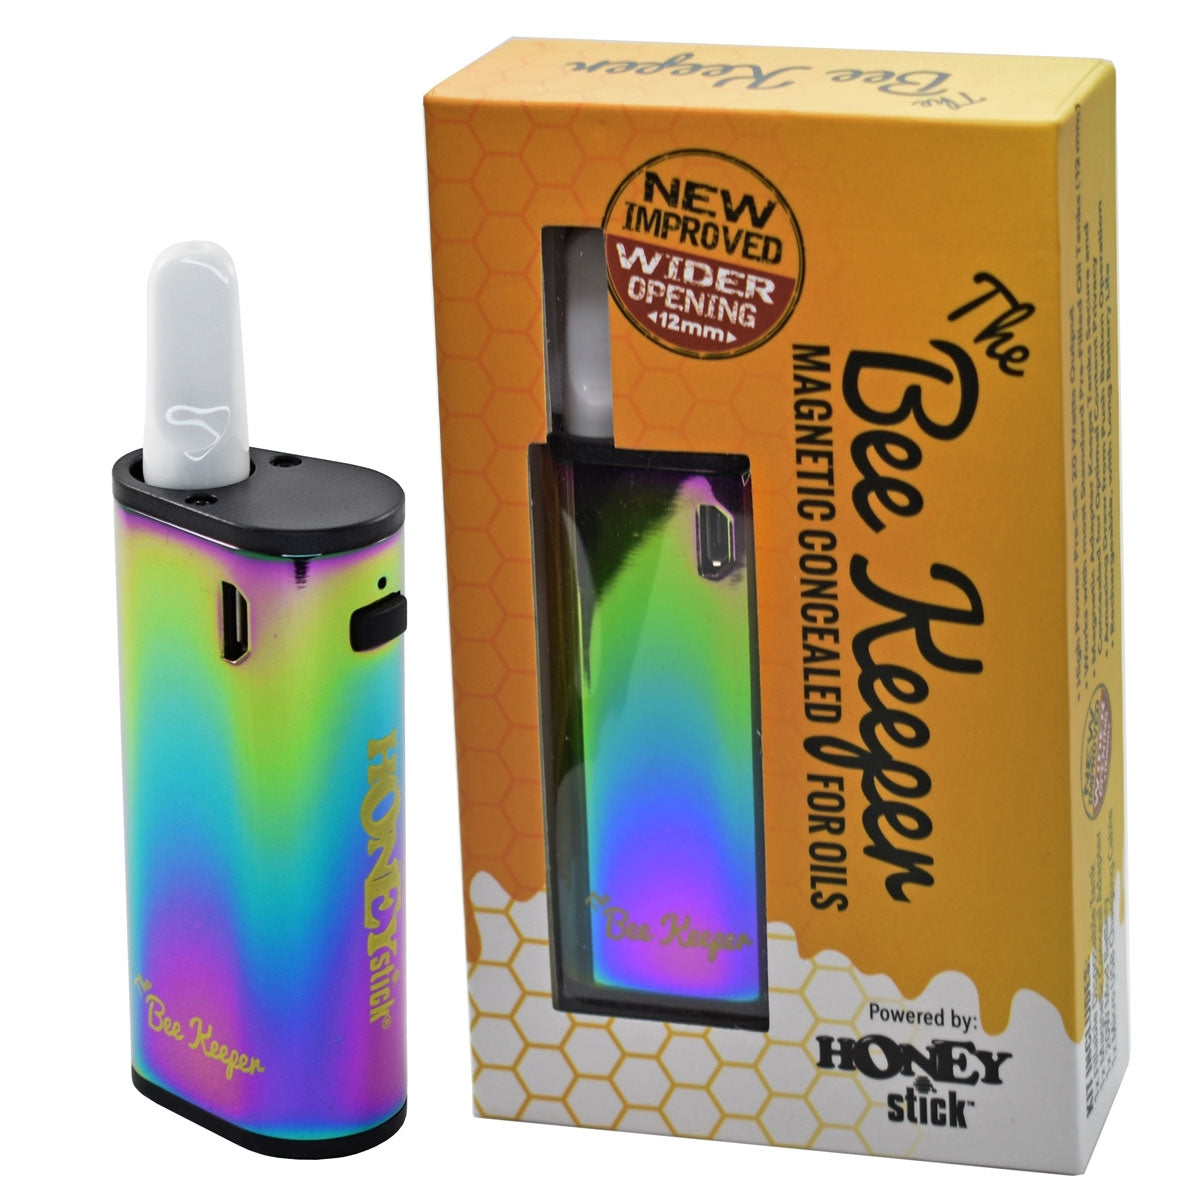 BeeKeeper 2.0 Multi-Color Limited Edition Oil Vaporizer